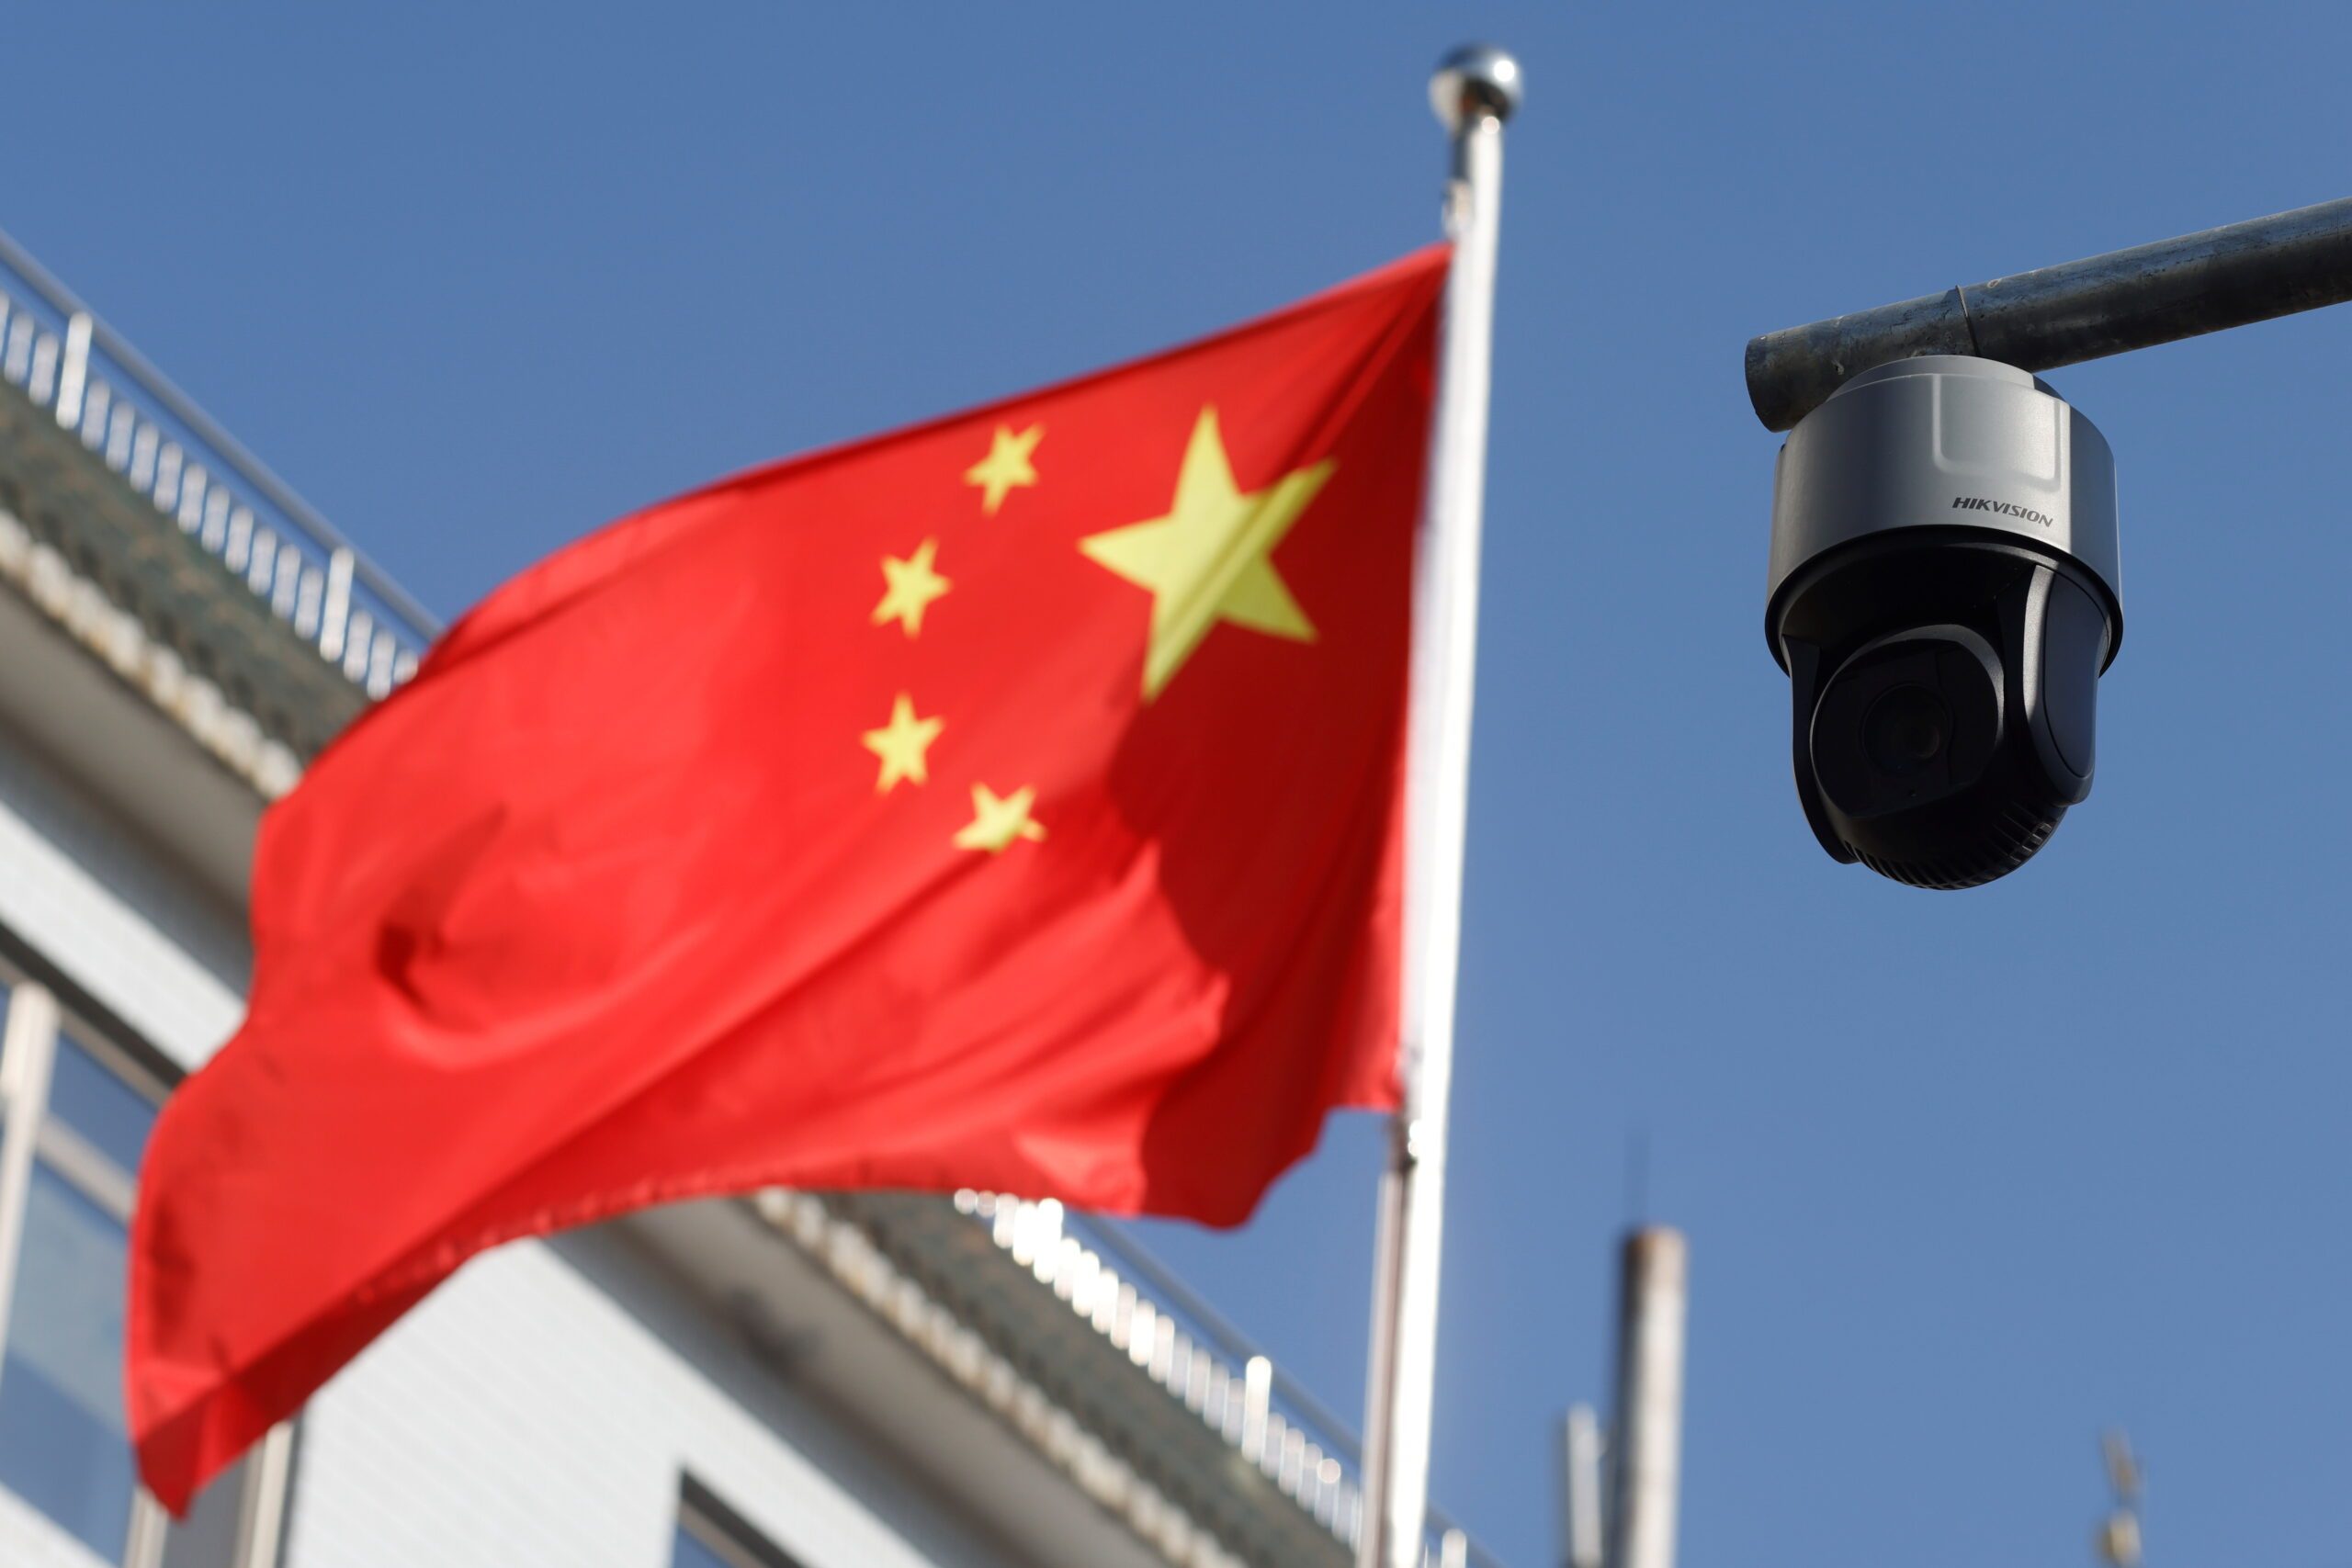 Chinese province targets journalists, foreign students with planned new surveillance system